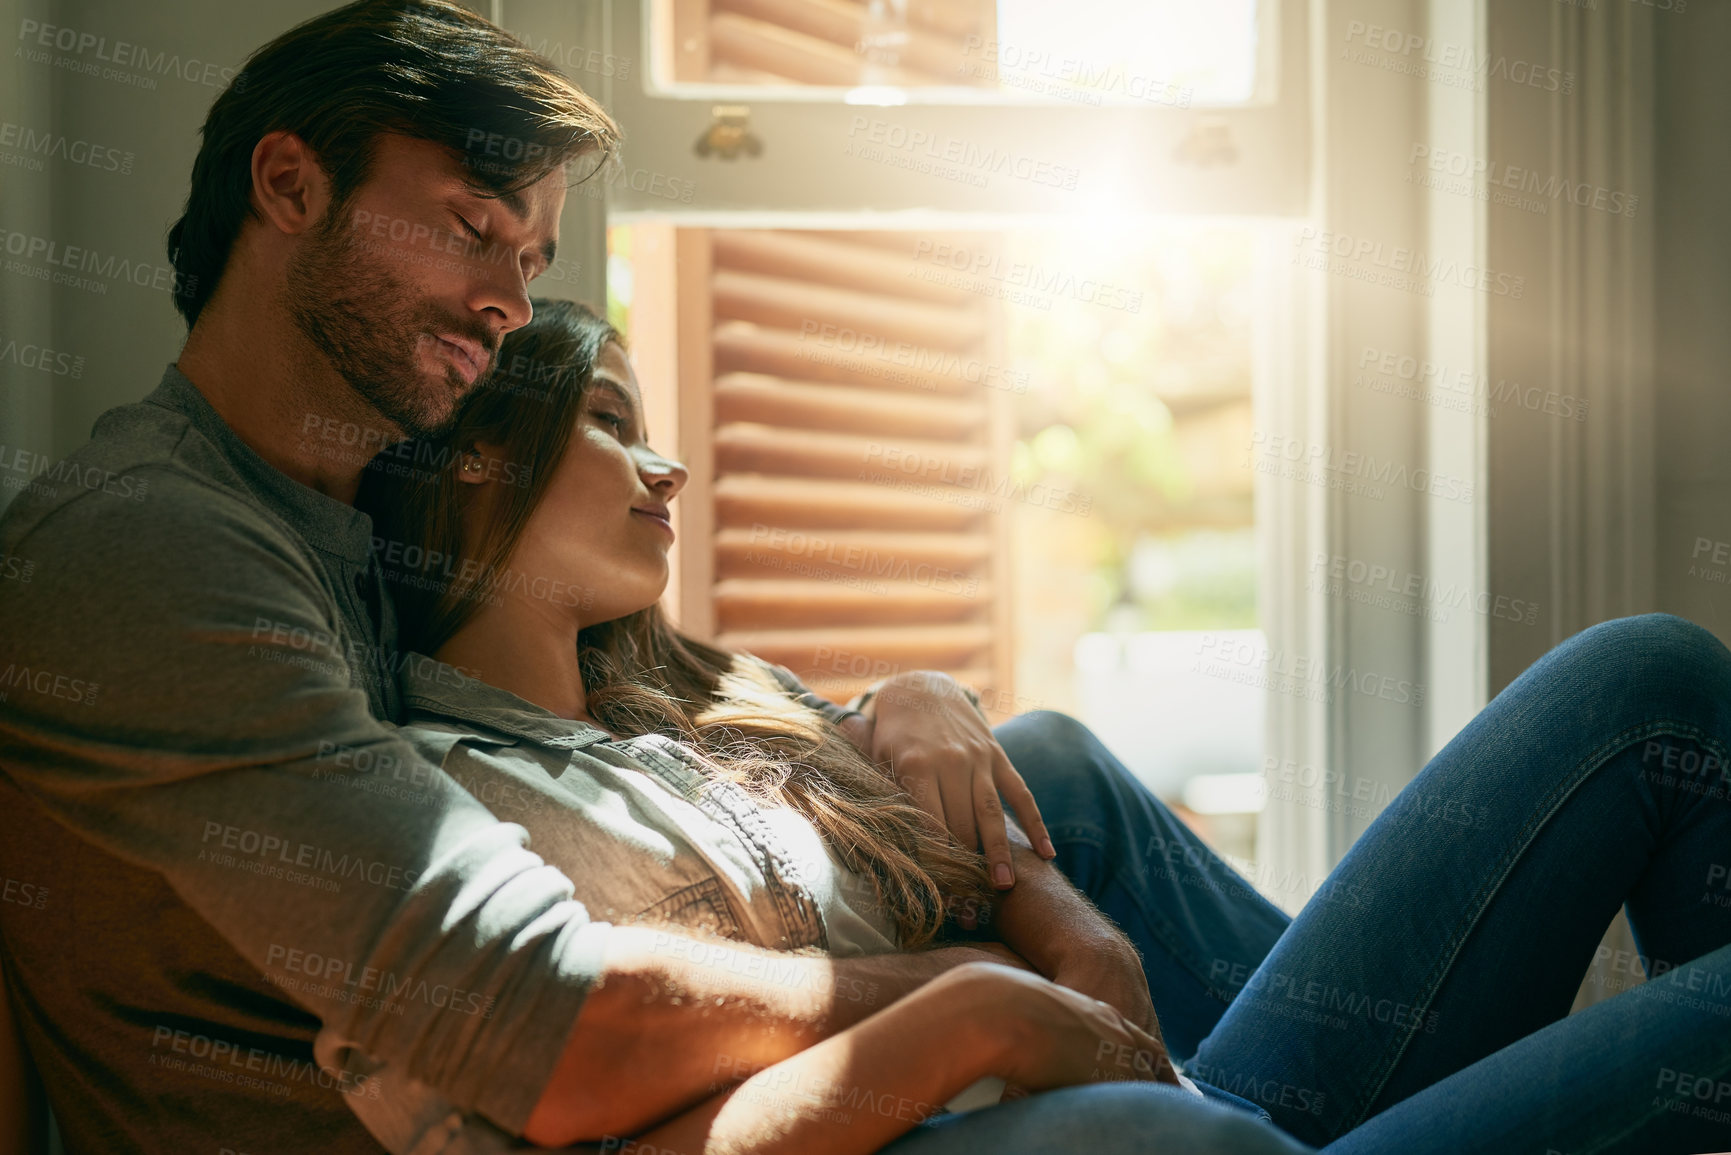 Buy stock photo Shot of an affectionate young couple holding each other at home in the sunlight